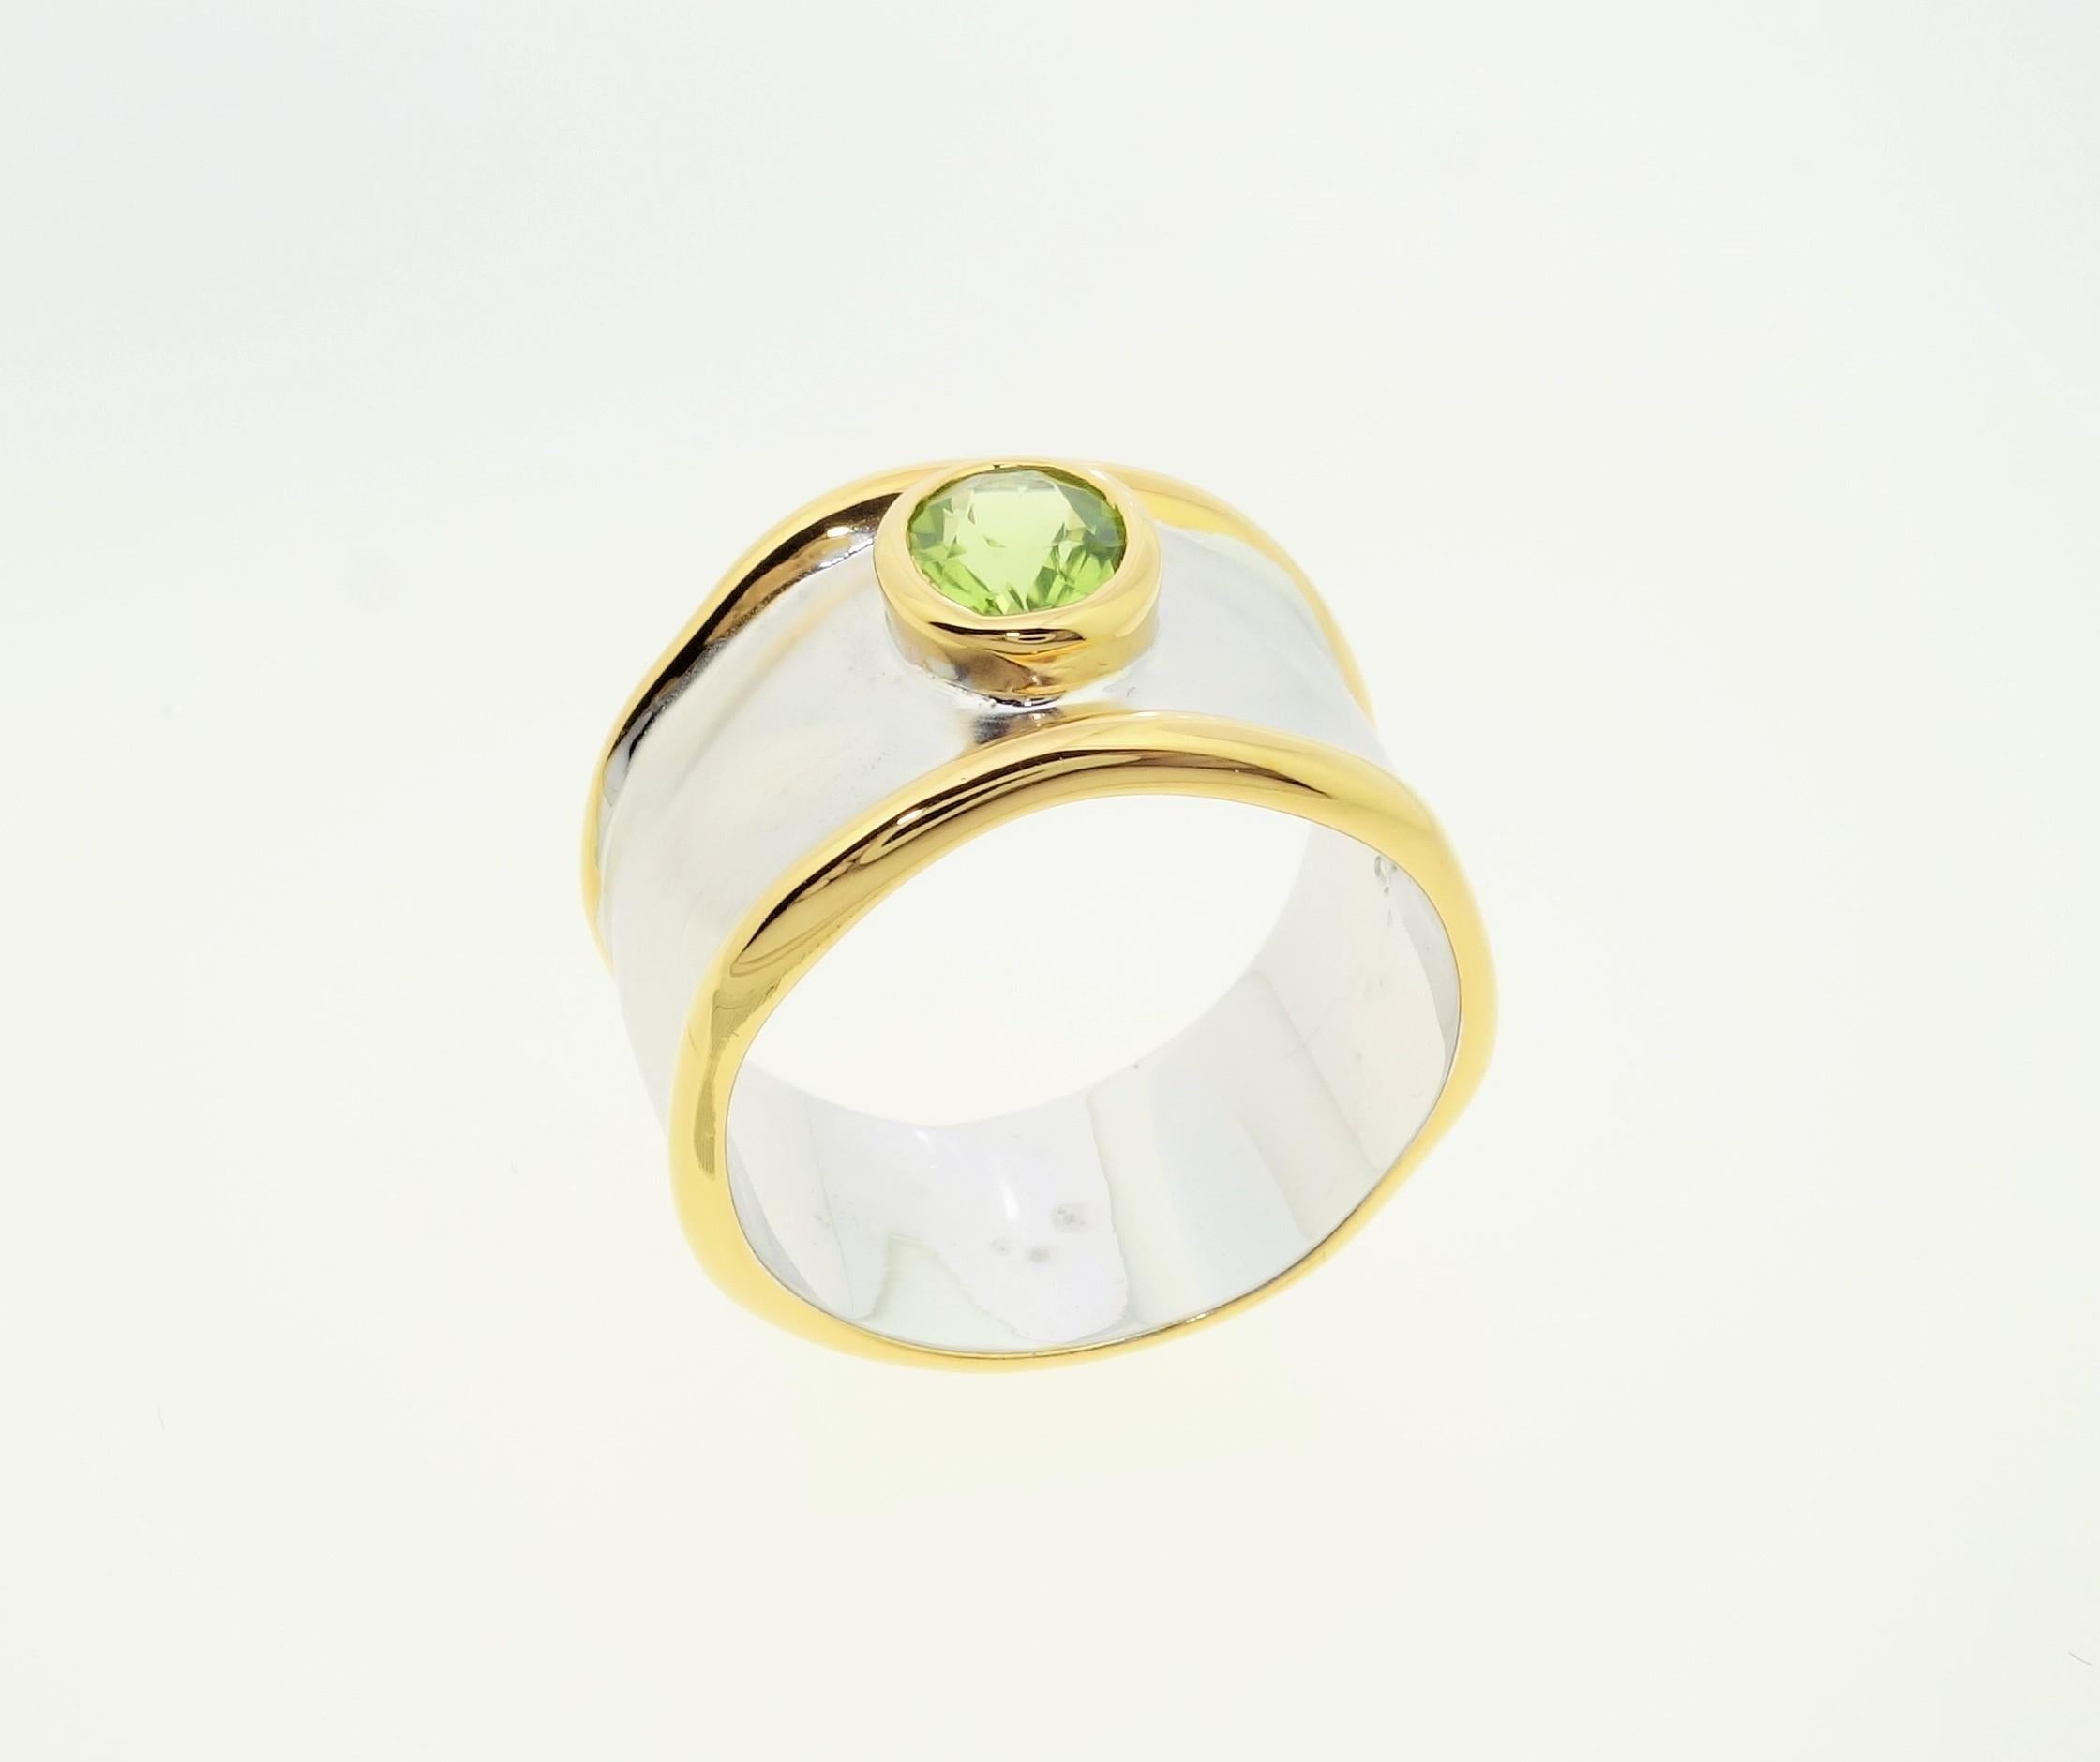 Striking Peridot Solitaire Cocktail Sterling Silver Ring Estate Fine Jewelry In New Condition For Sale In Montreal, QC